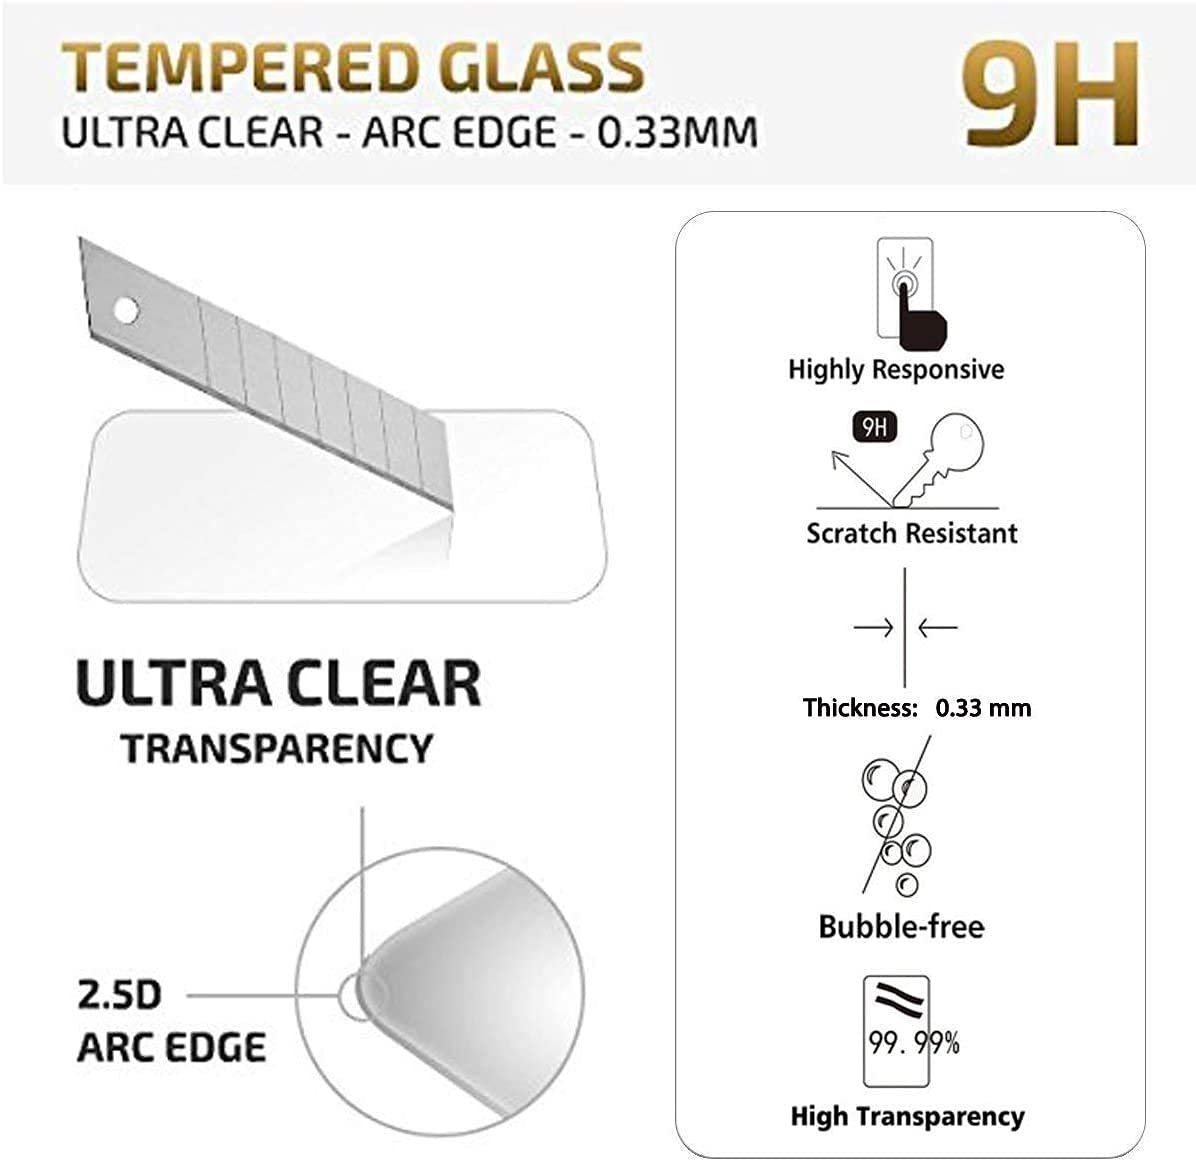 NEW'C [3 Pack] Designed for Samsung Galaxy A12, Galaxy A02s Screen Protector Tempered Glass, Case Friendly Ultra Resistant